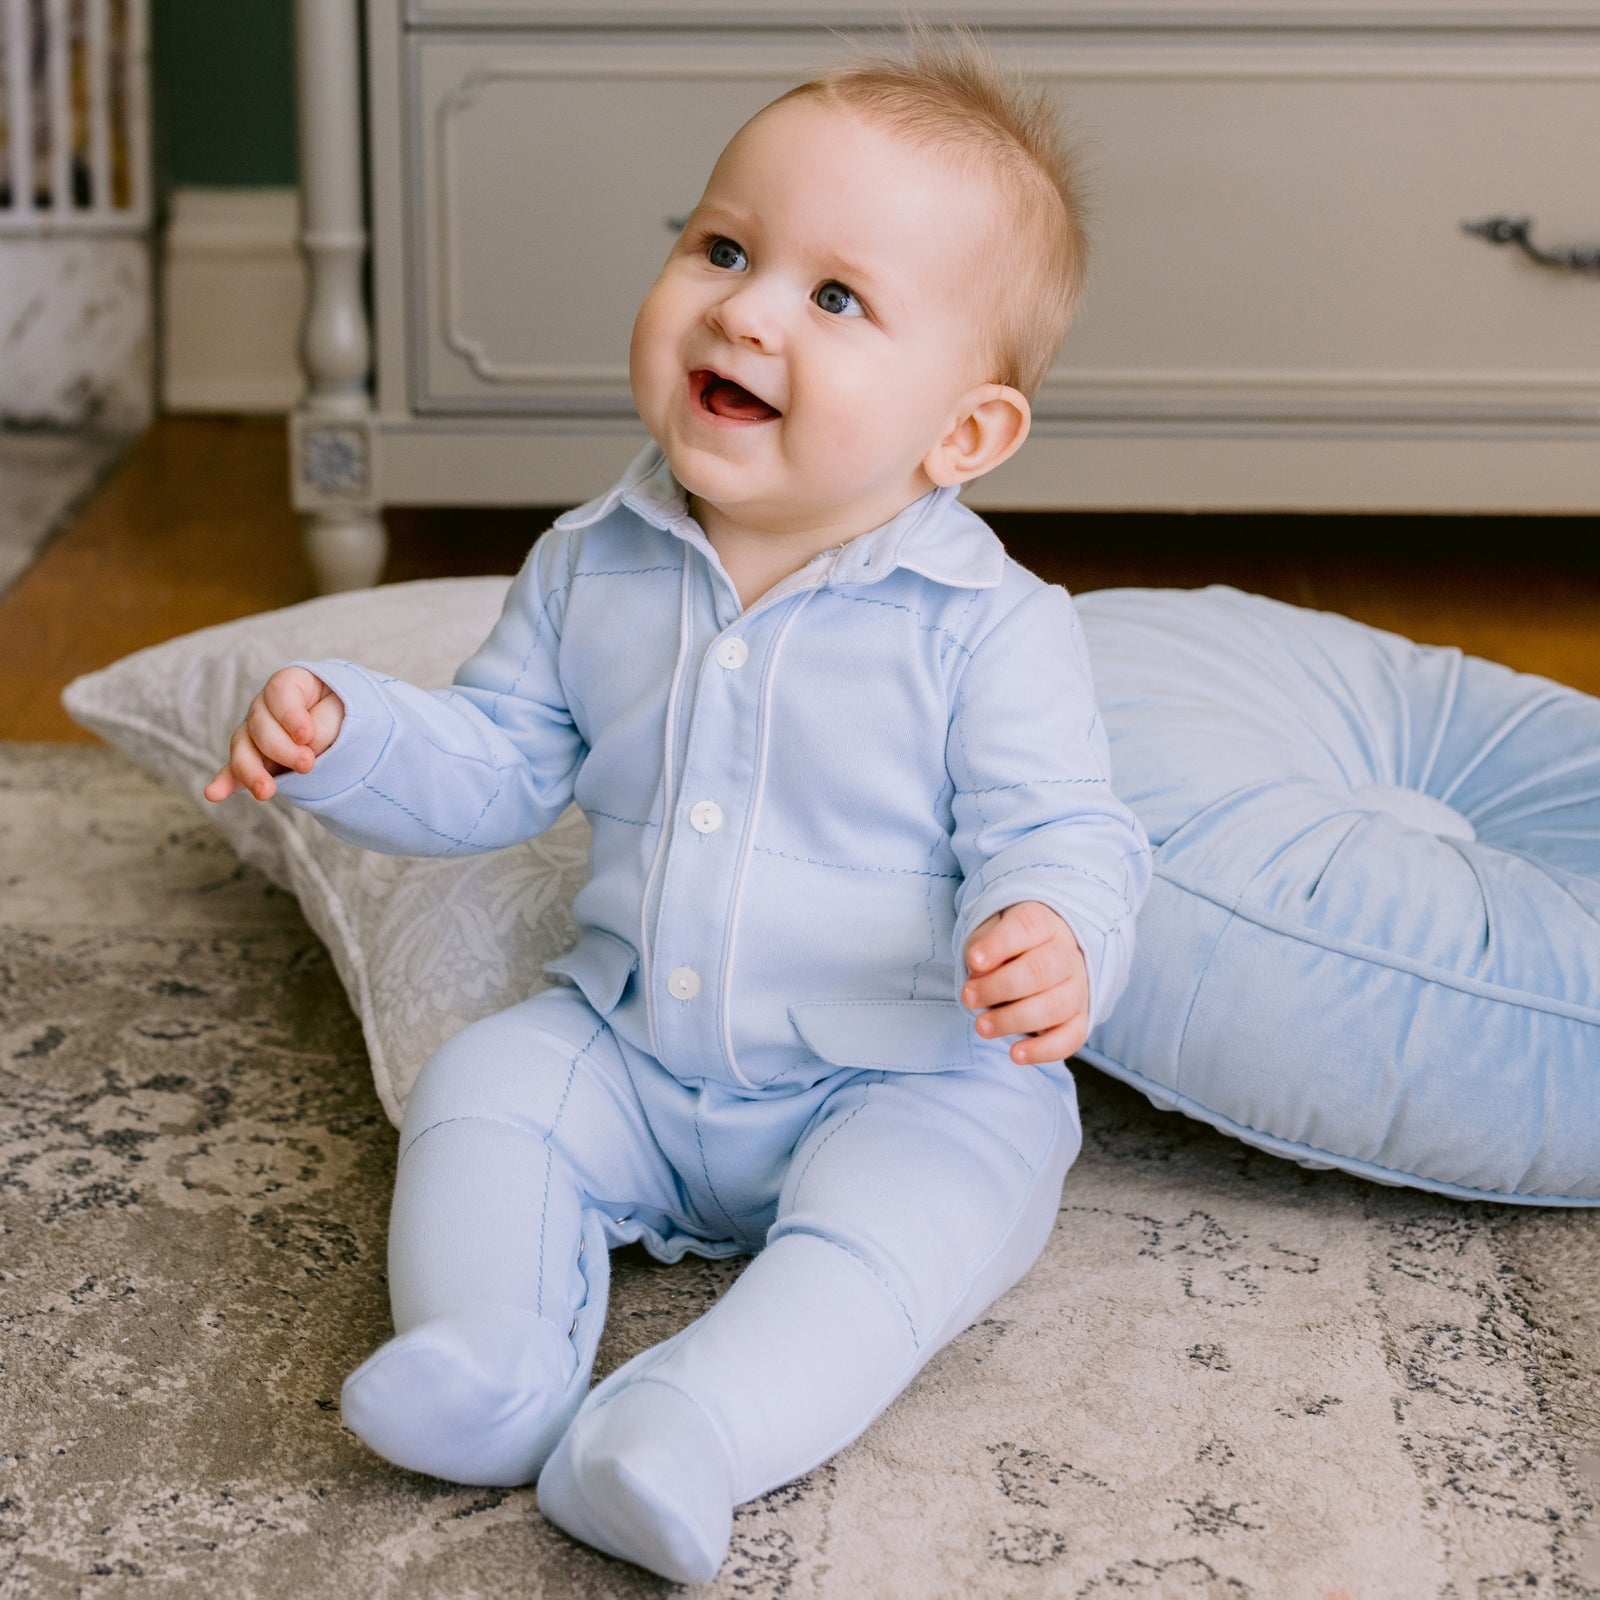 Emile et Rose | Traditional Baby Clothes for Newborn to 23 Months